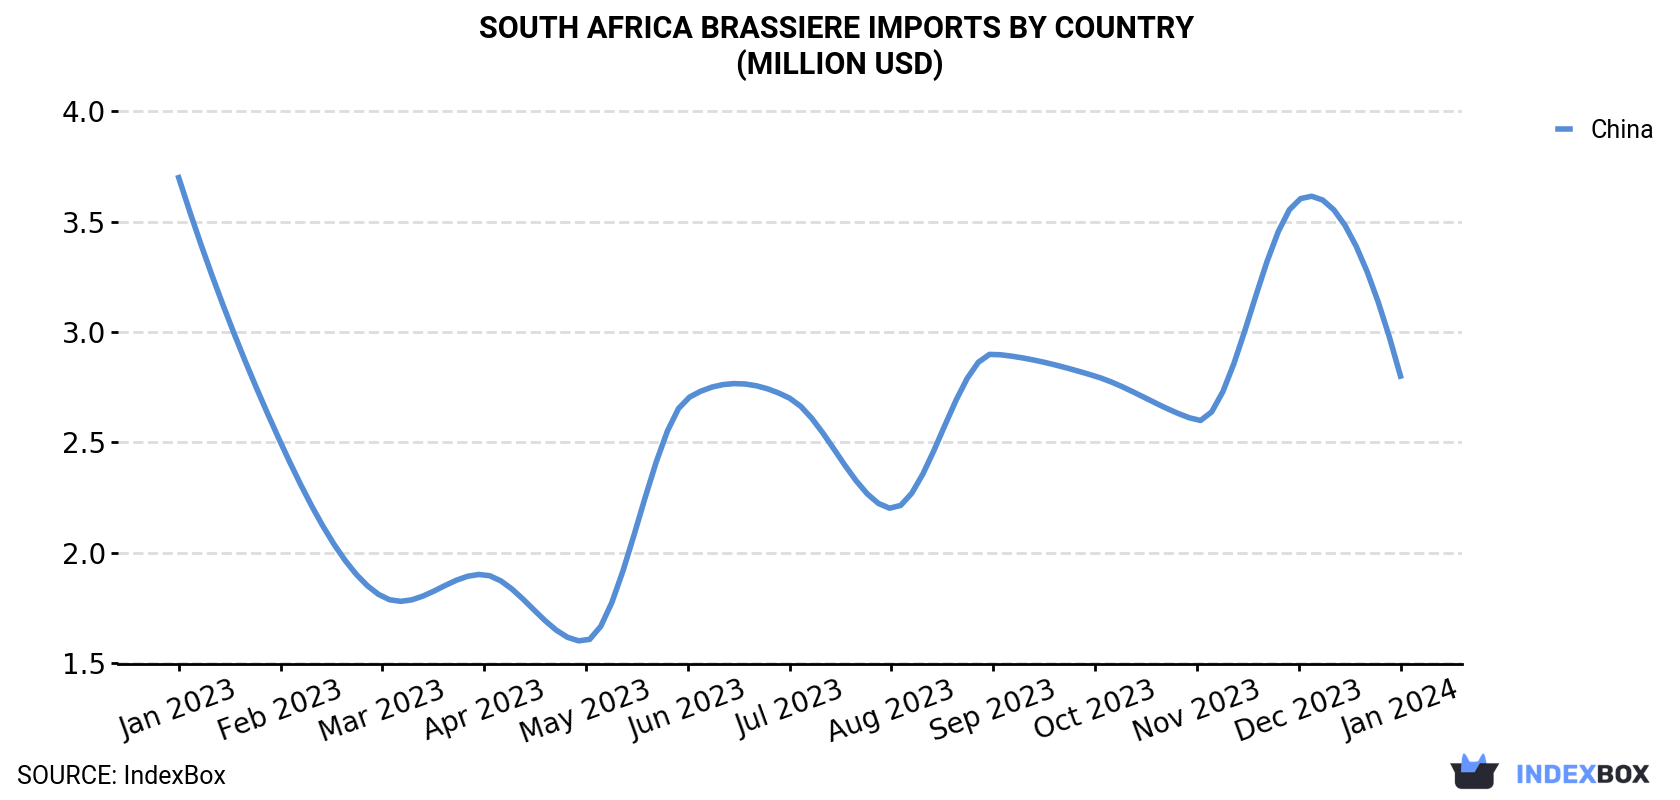 South Africa Brassiere Imports By Country (Million USD)